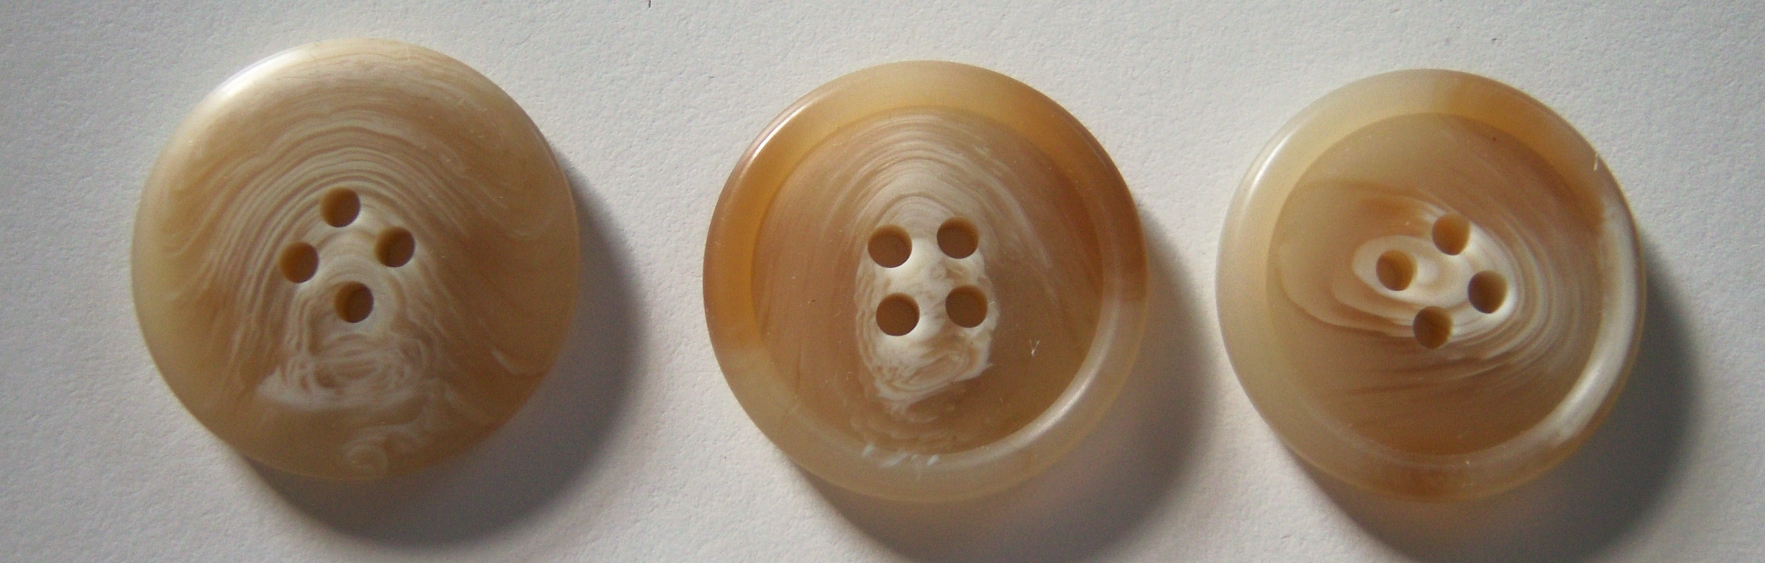 Camel/Ivory Marbled 1" 4 Hole Button